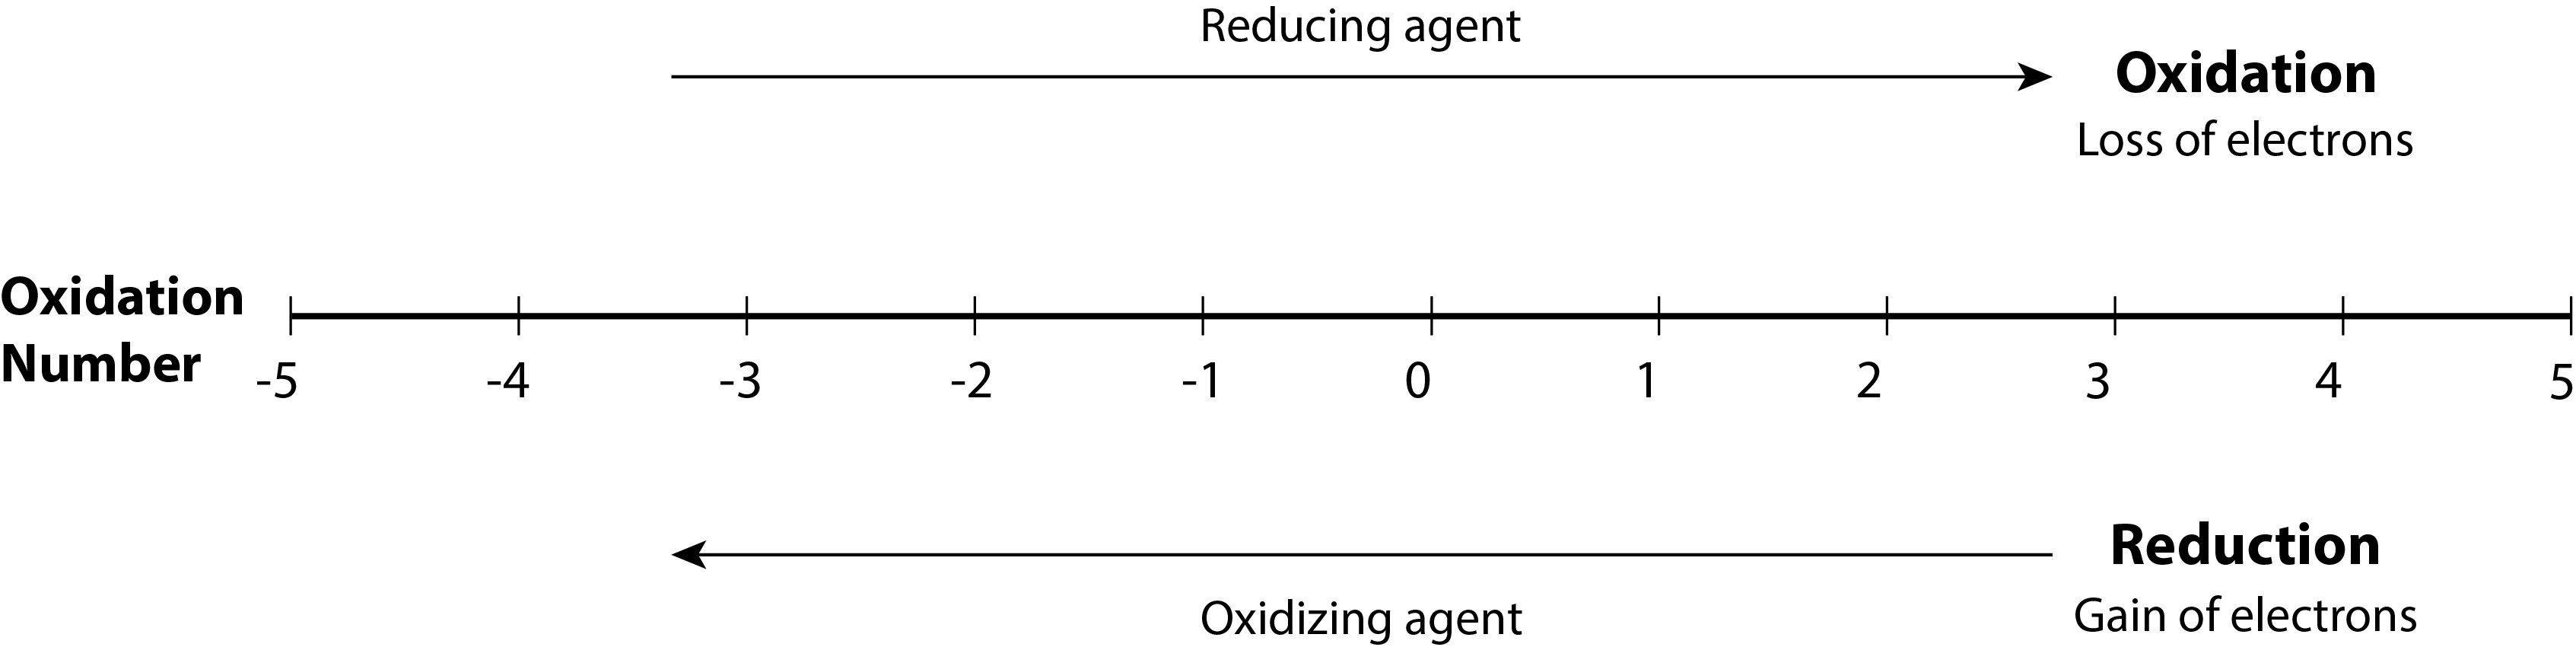 Number line showing oxidation numbers starting at -5 and increasing by 1 to +5. Oxidation goes to the right signaling a loss of electrons and an increase in oxidation number. This is a reducing agent. Reduction goes to the left signaling a gain of electrons and an decrease in oxidation number. This is an oxidizing agent.